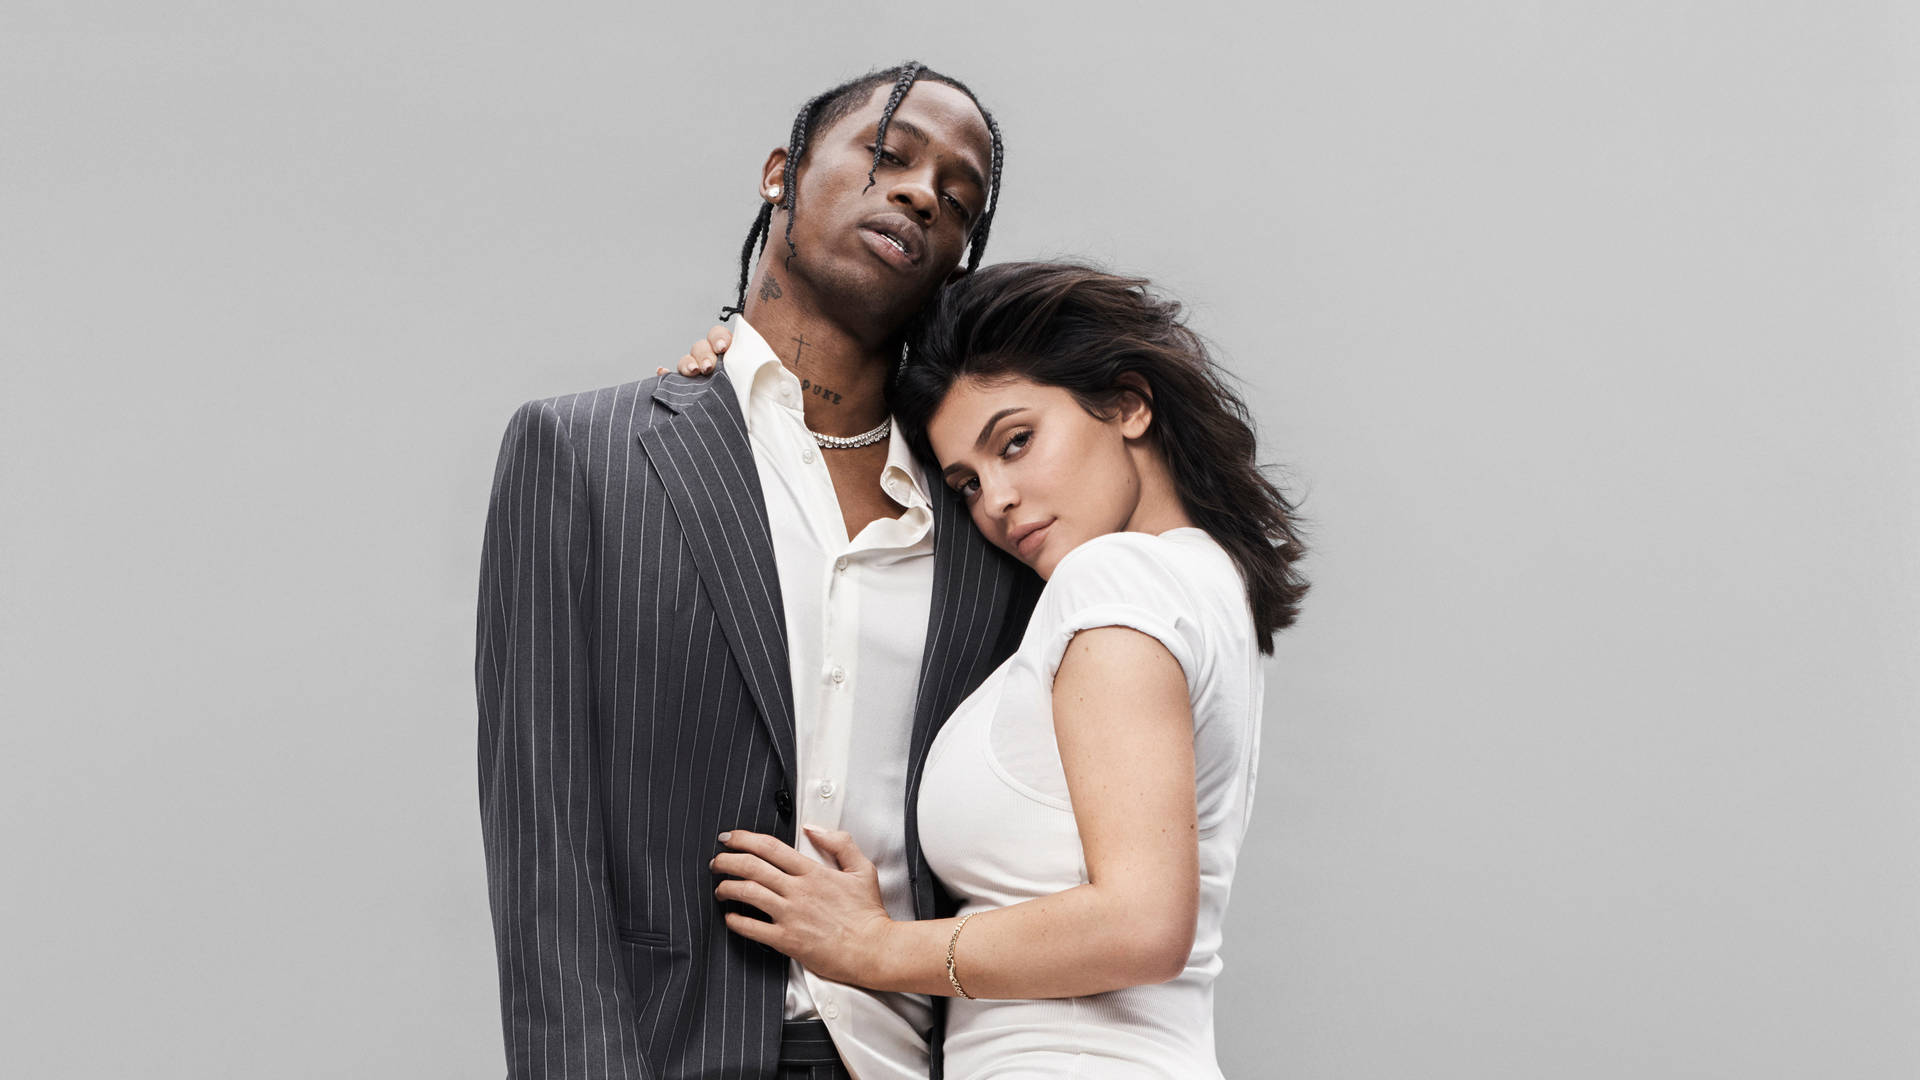 Travis Scott and Kylie Jenner pose in GQ August 2018 Wallpaper